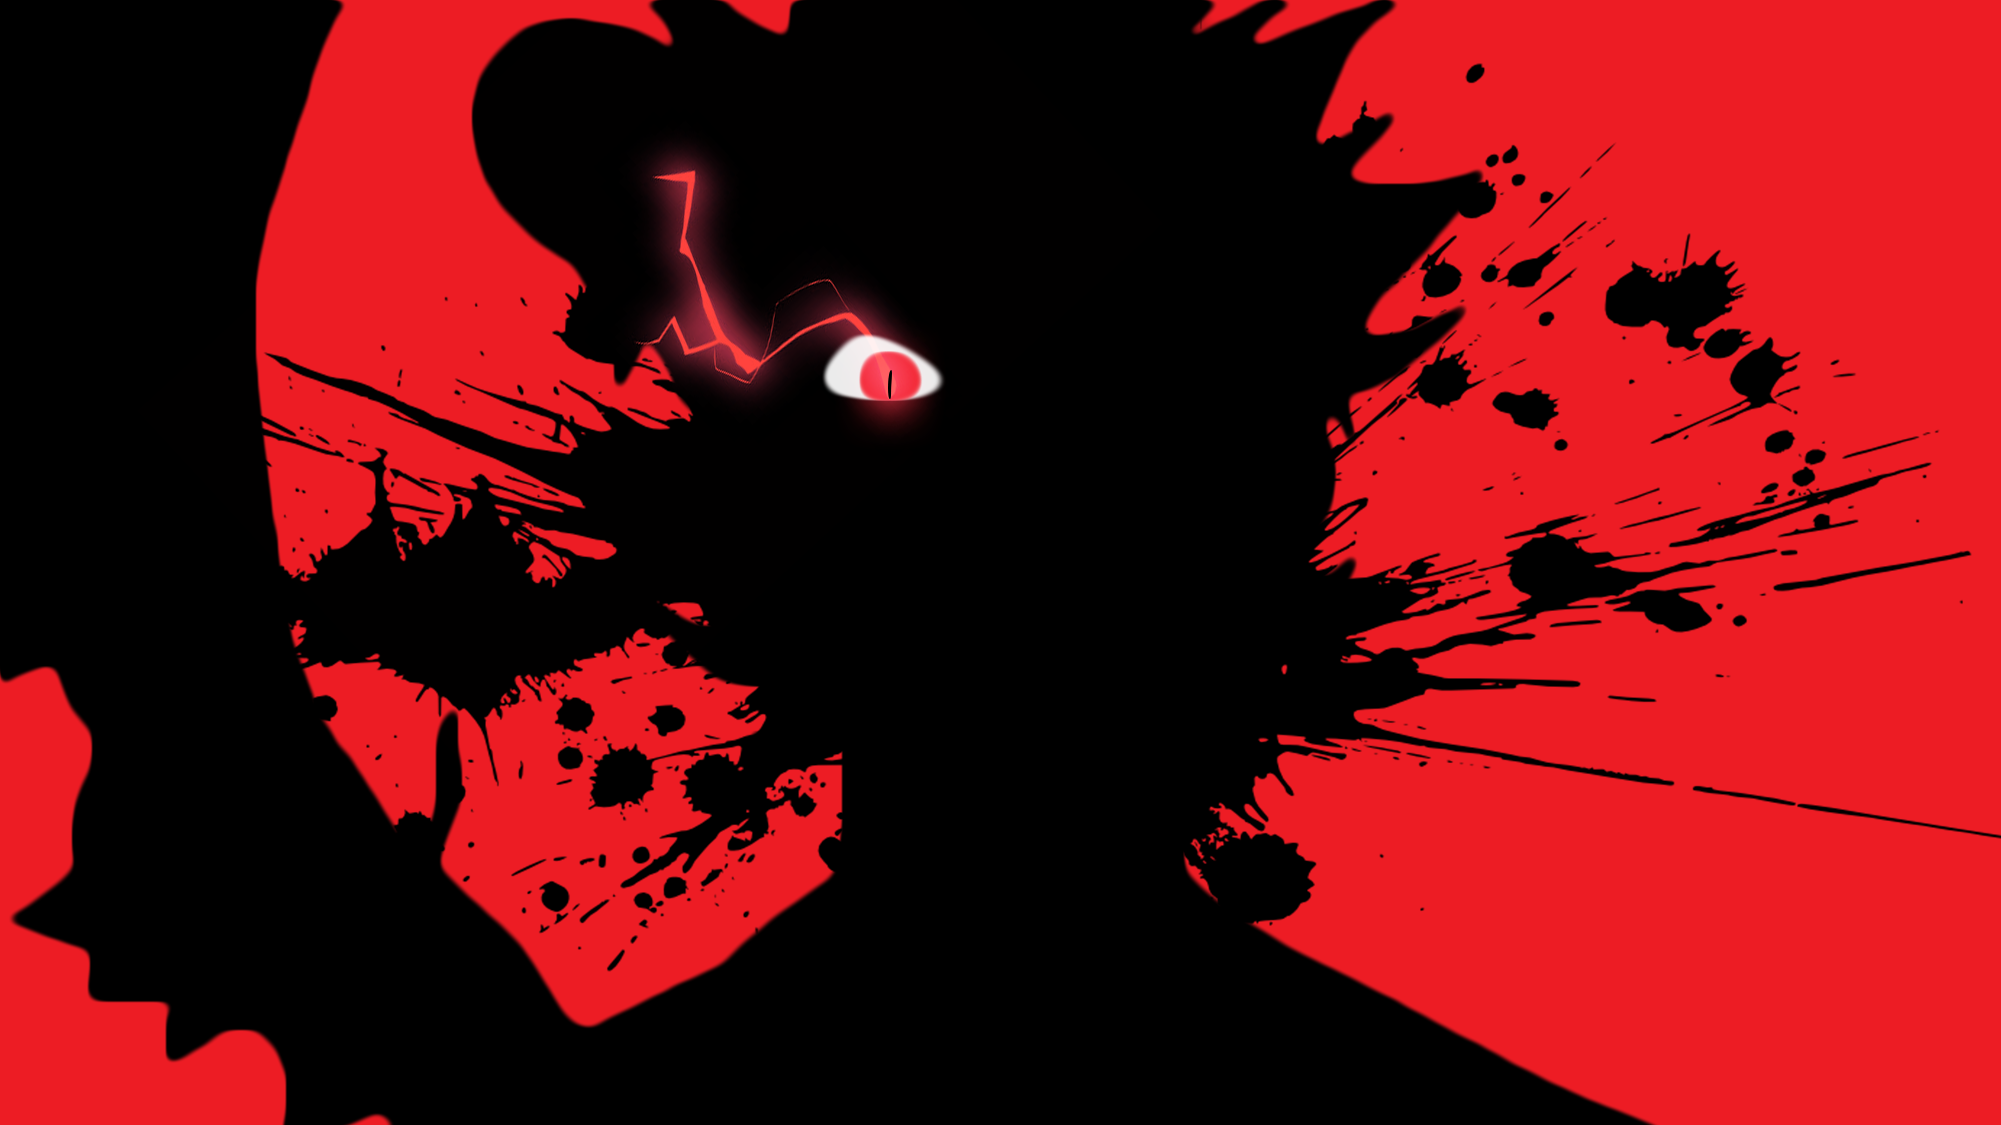 Made a wallpaper for Asta's demon transformation (alternate in comments)